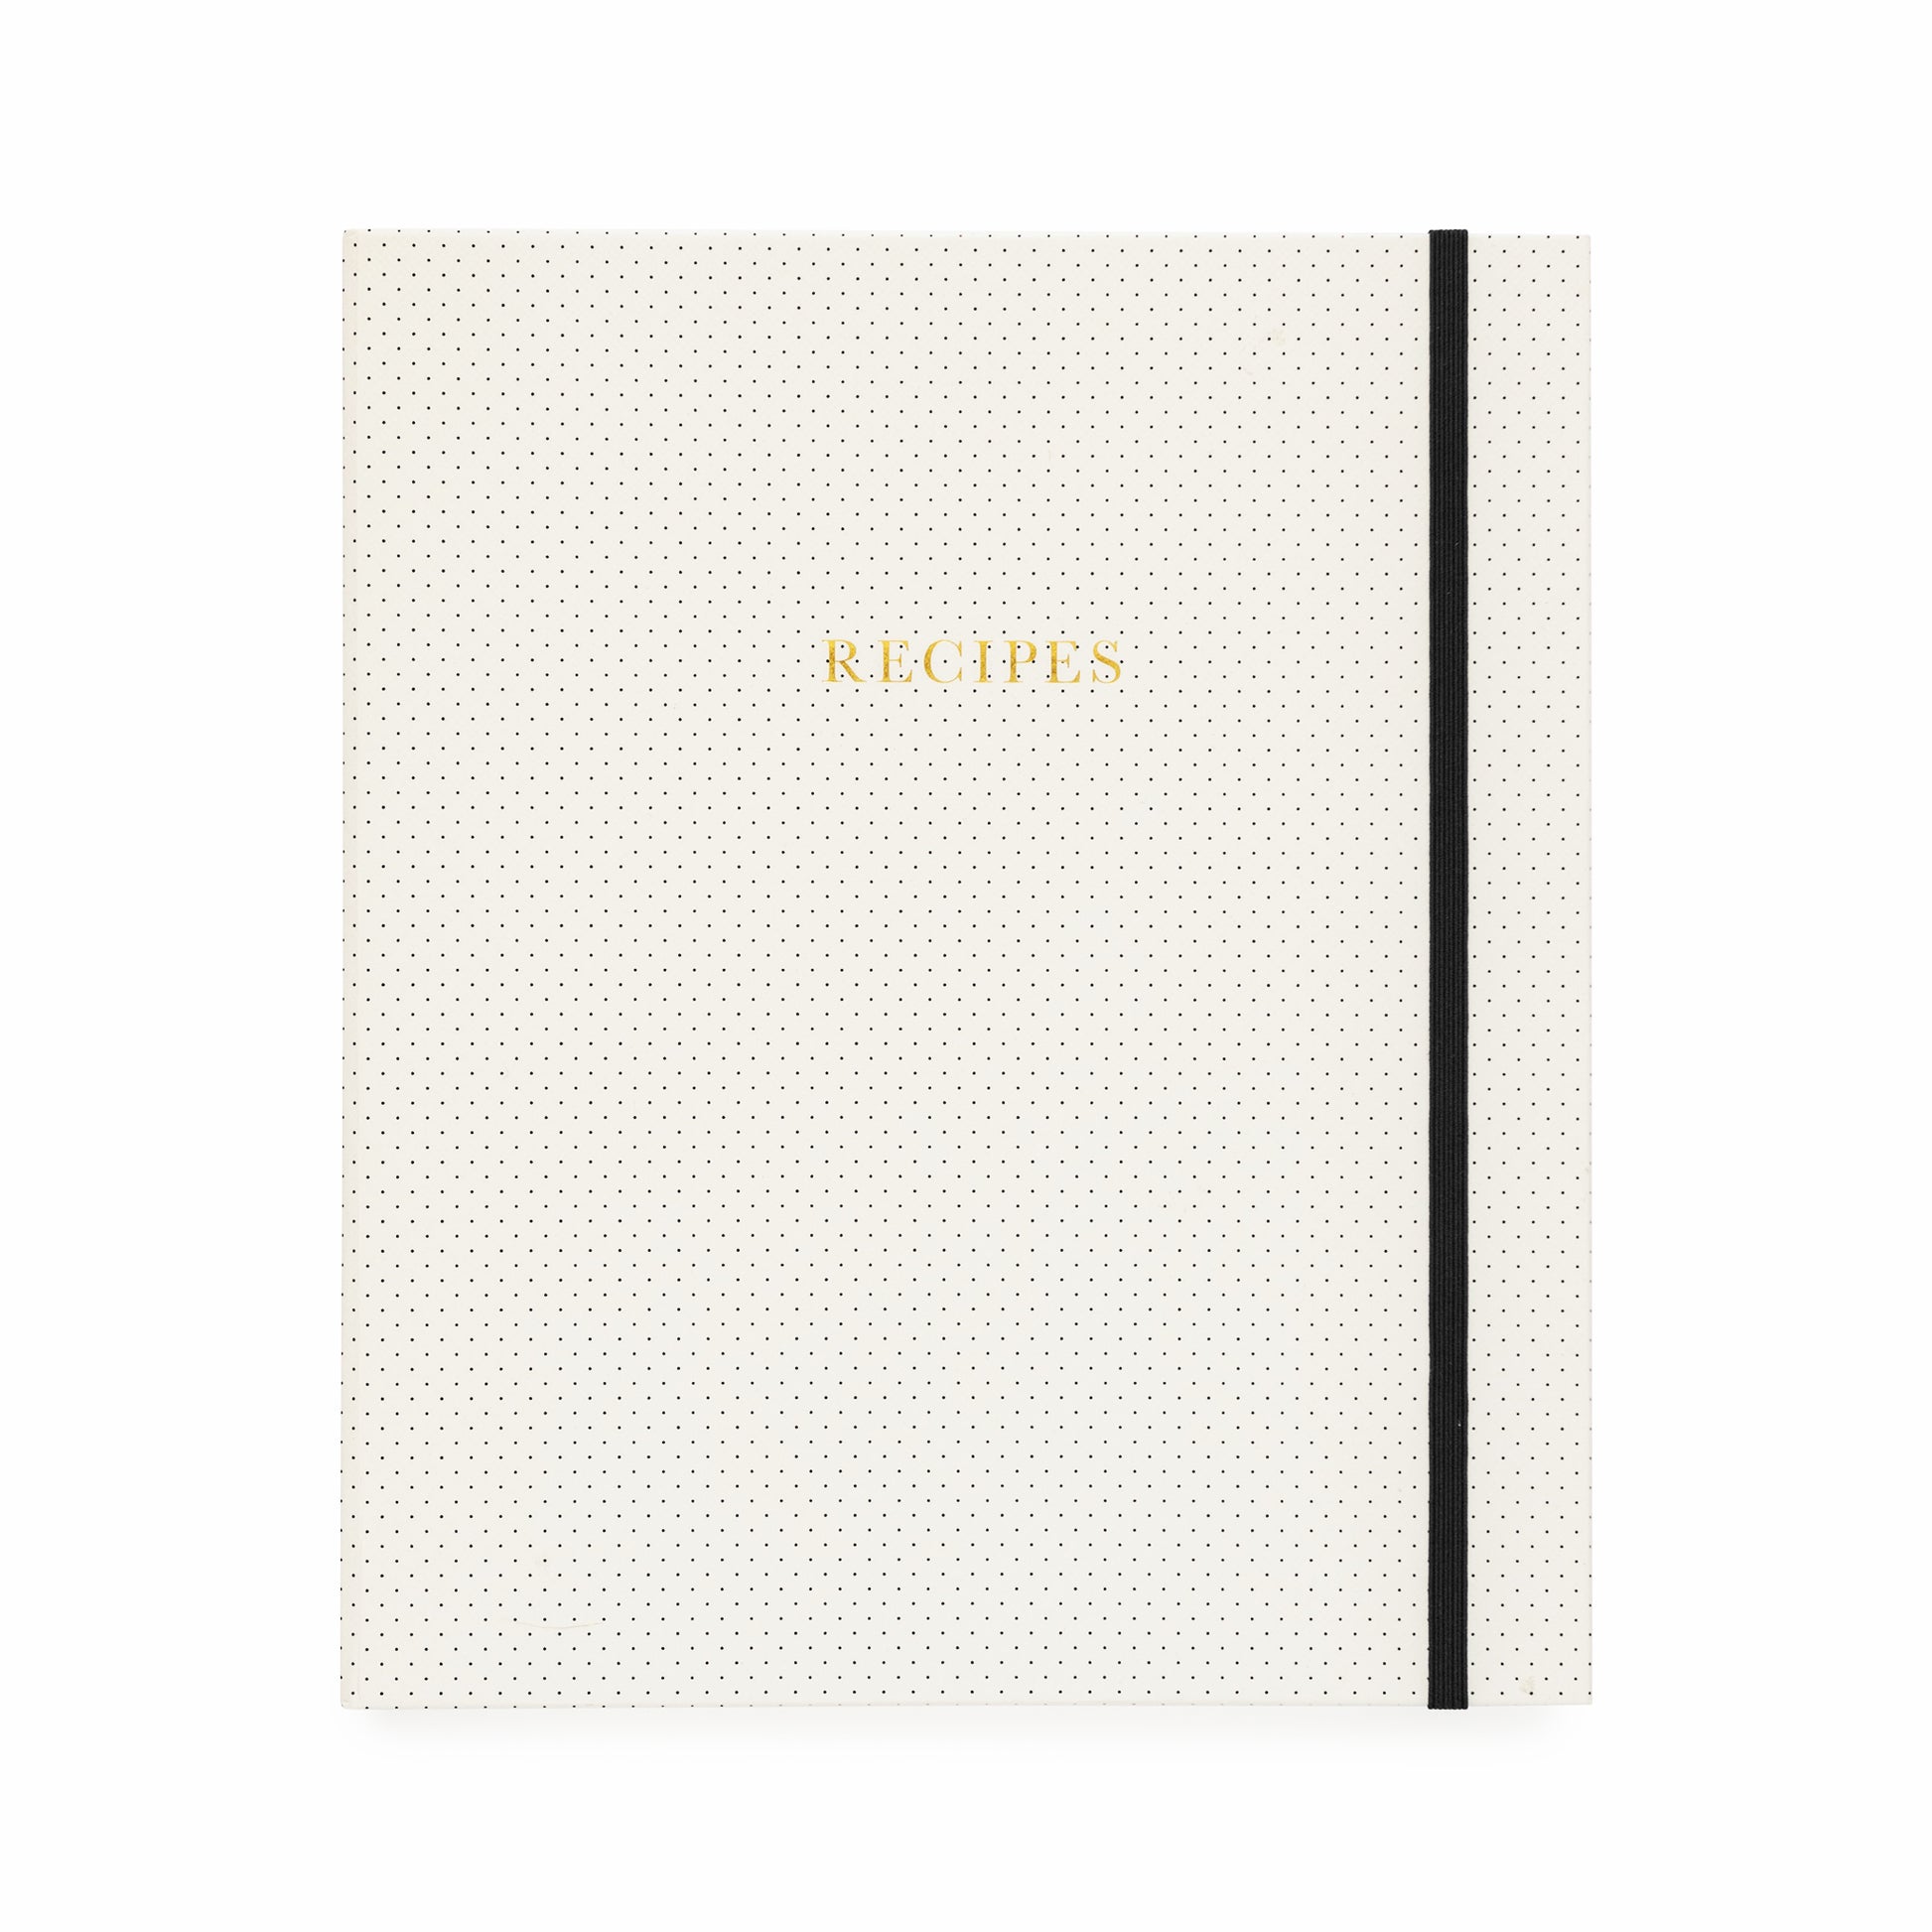 Recipes from my Grandma: Hardcover Blank Recipe Book to write in